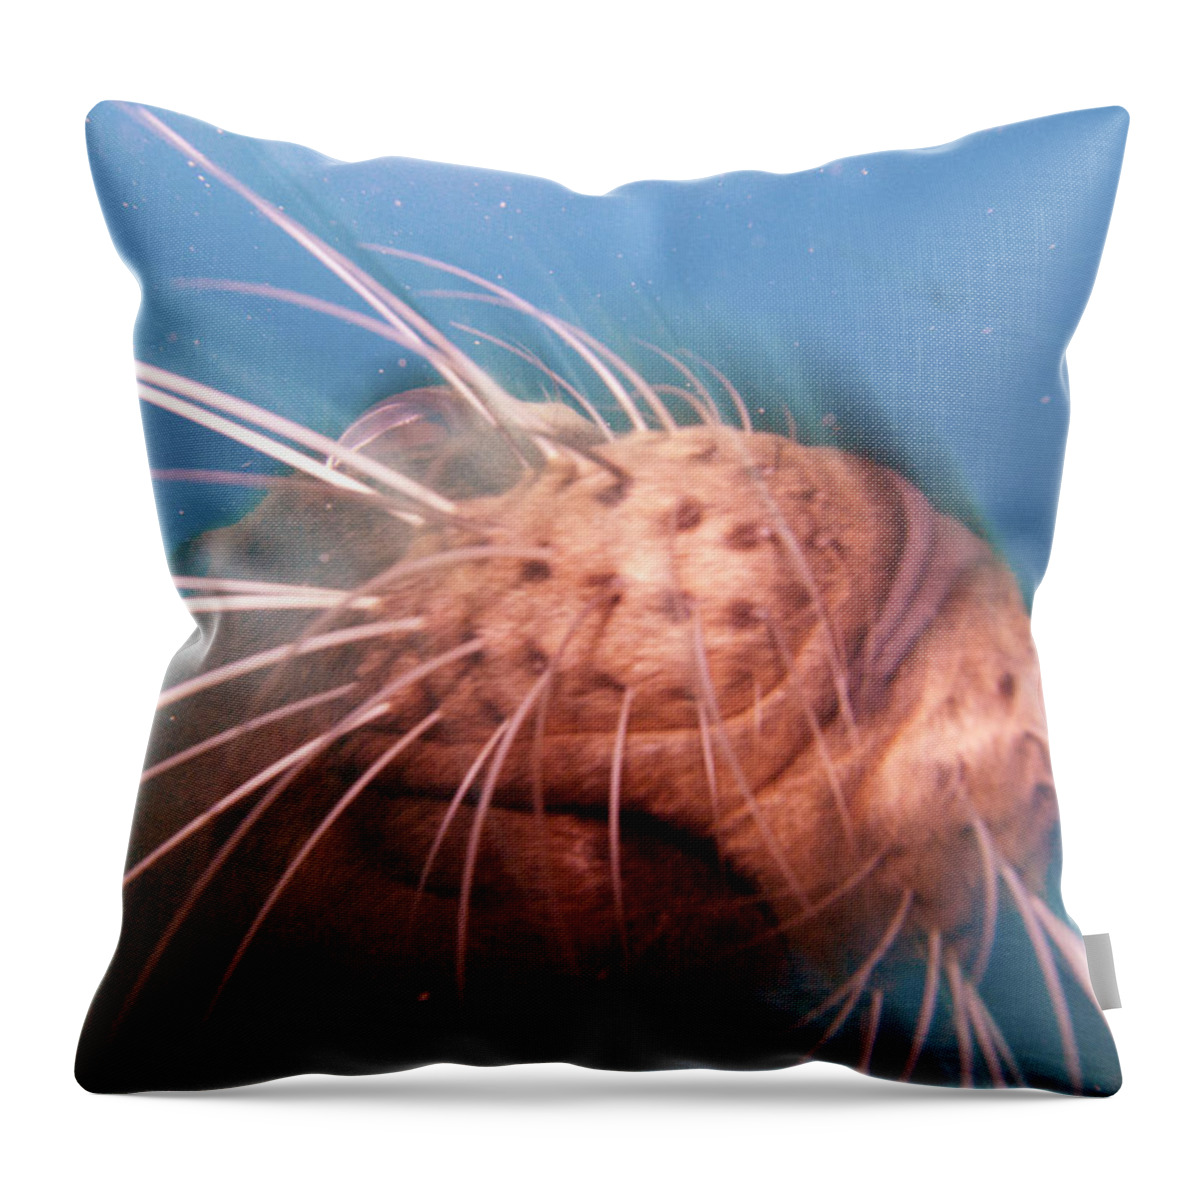 Diving_baja_mexico Throw Pillow featuring the photograph Wiskers and a Nose of Sea Lion by Matt Swinden